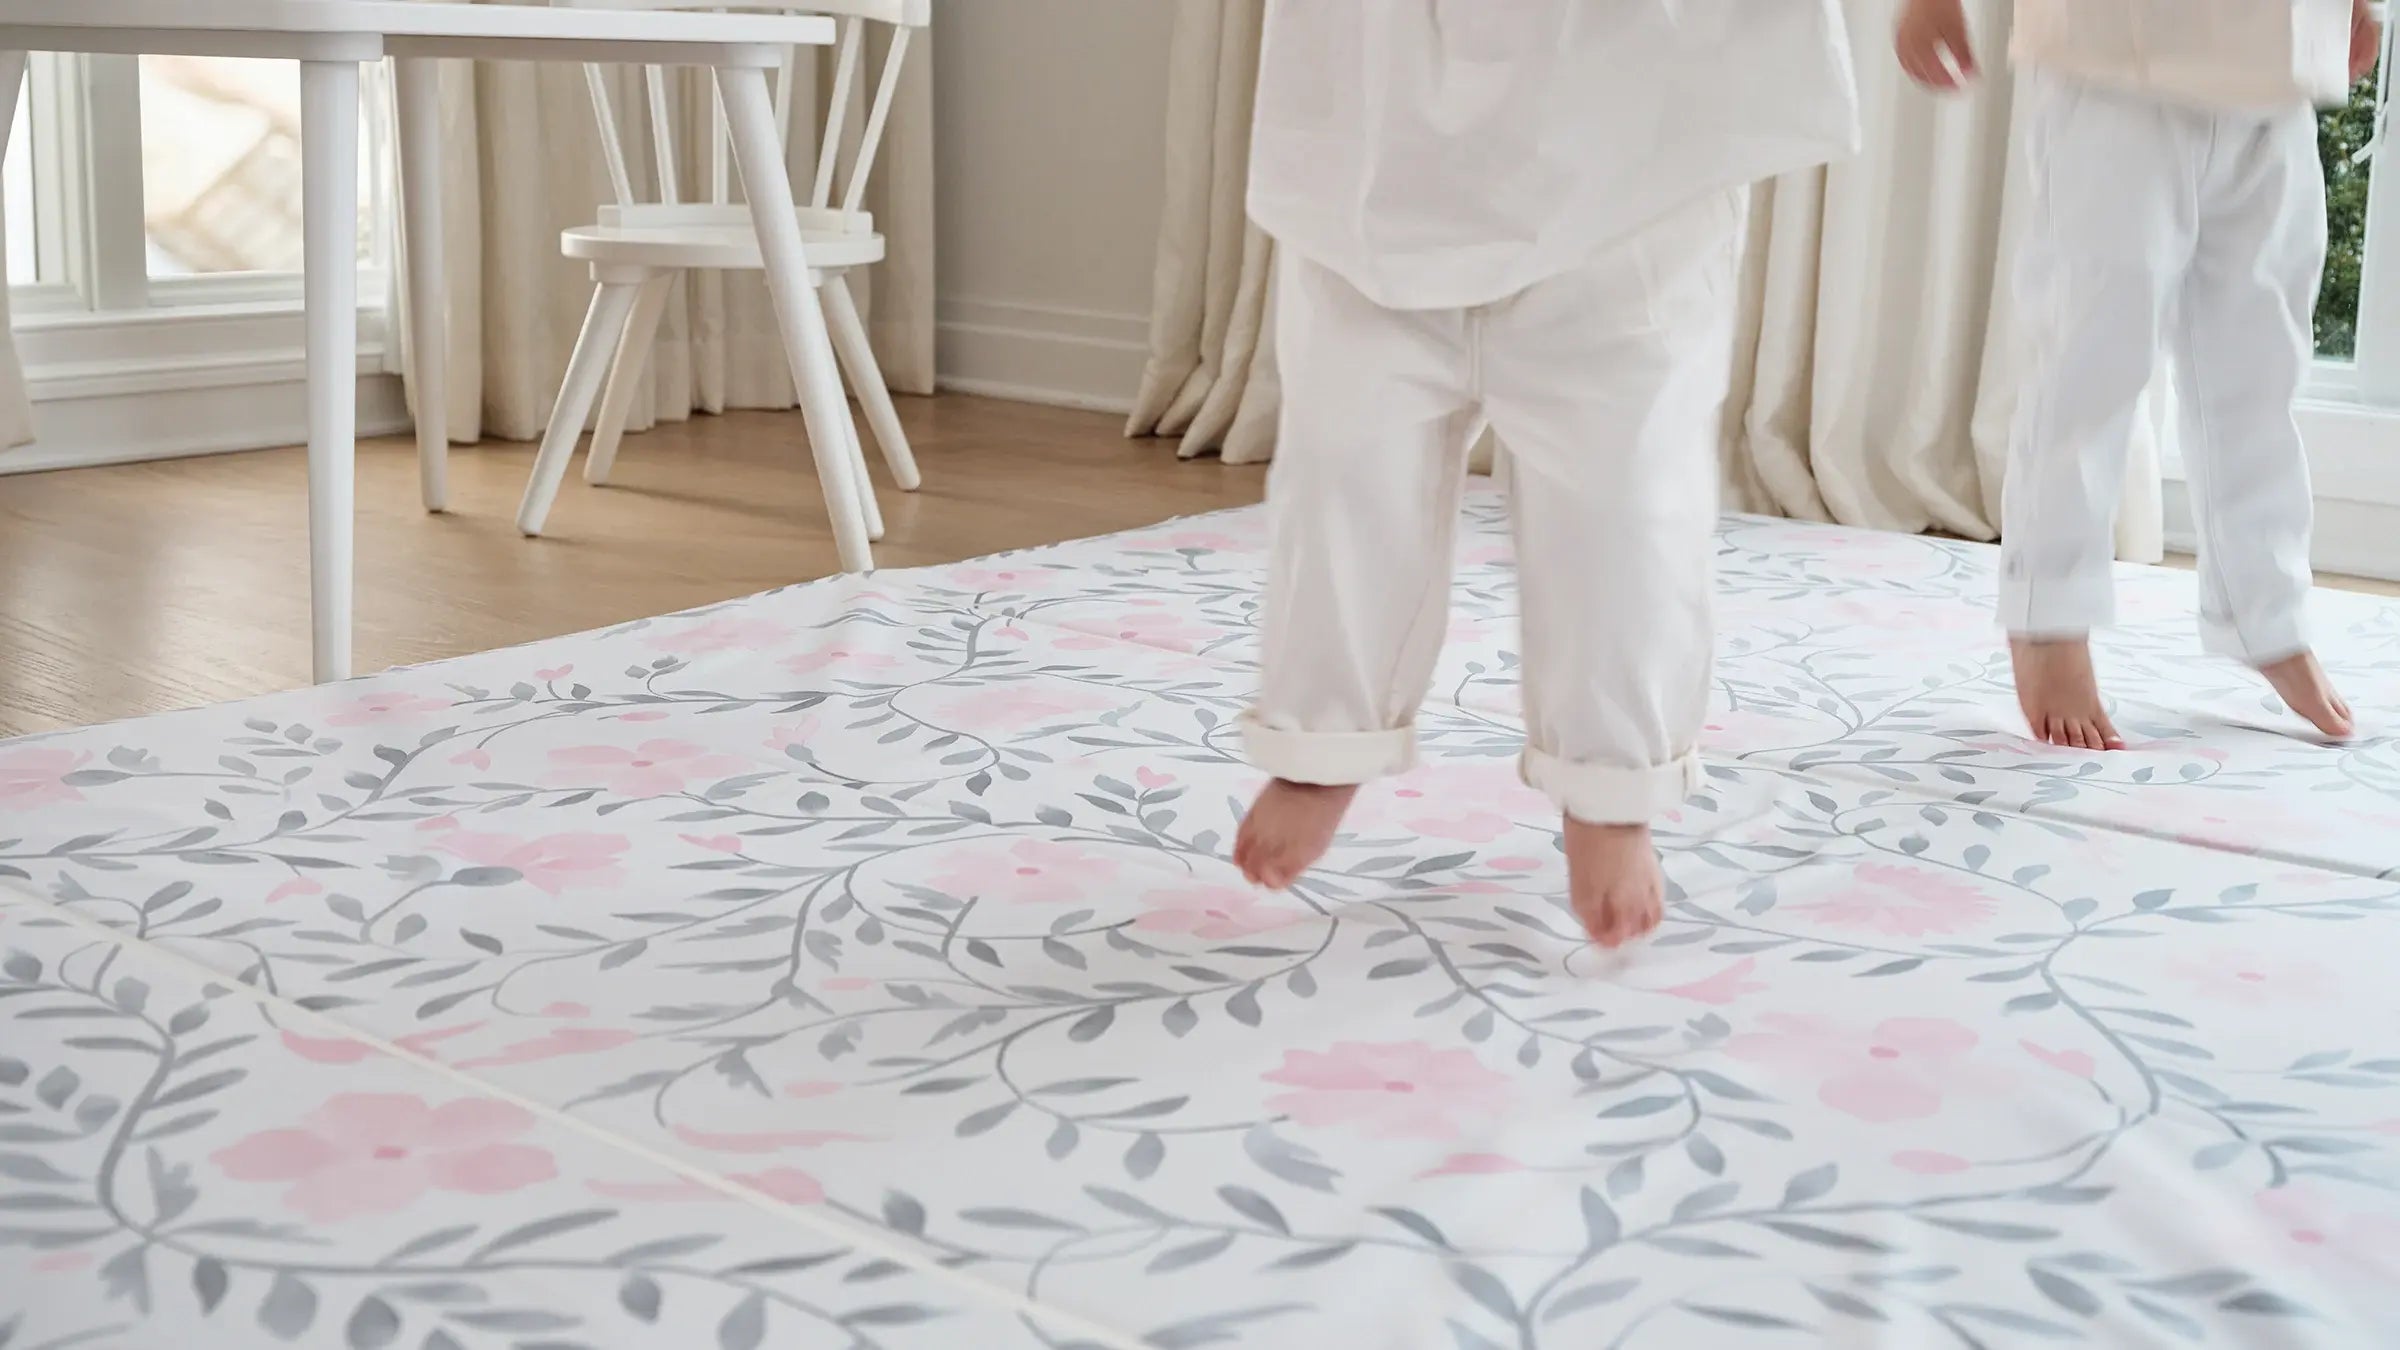 Faye Macaron gray and pink floral tumbling mat shown in play room with 2 toddlers feet jumping up off the mat